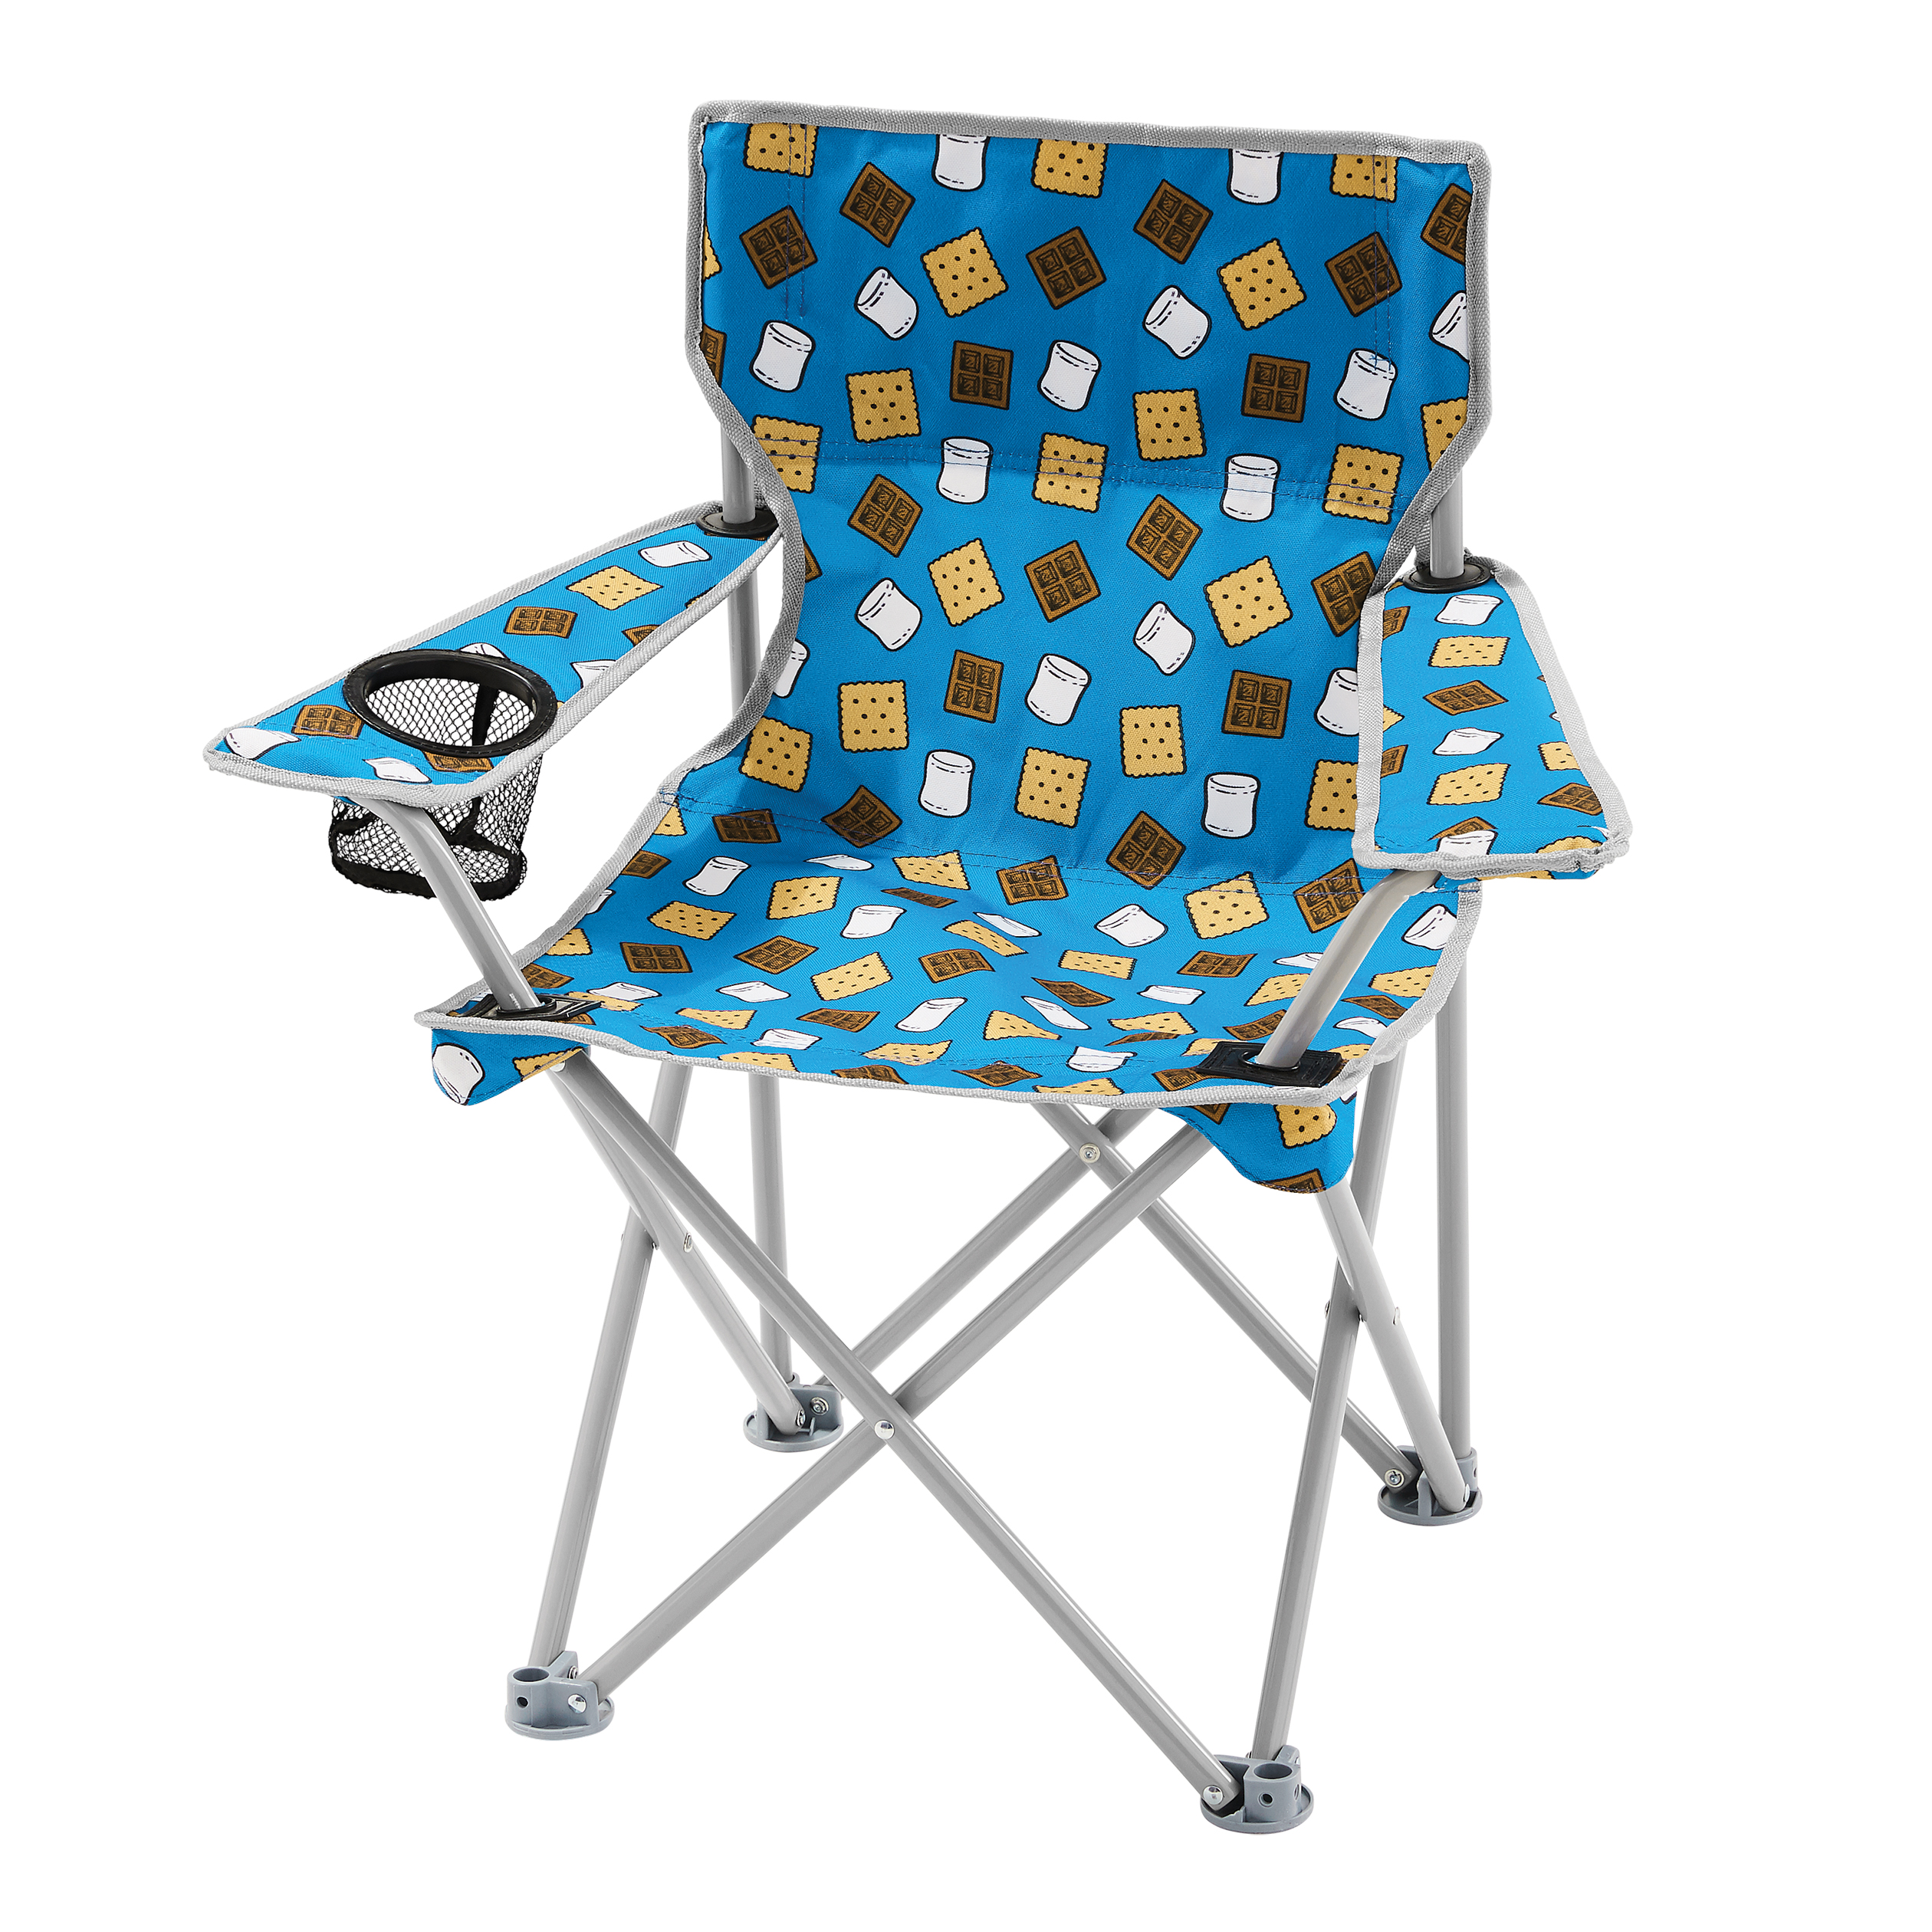 Ozark Trail Kids Camping Chair (Smores) Only 2.50